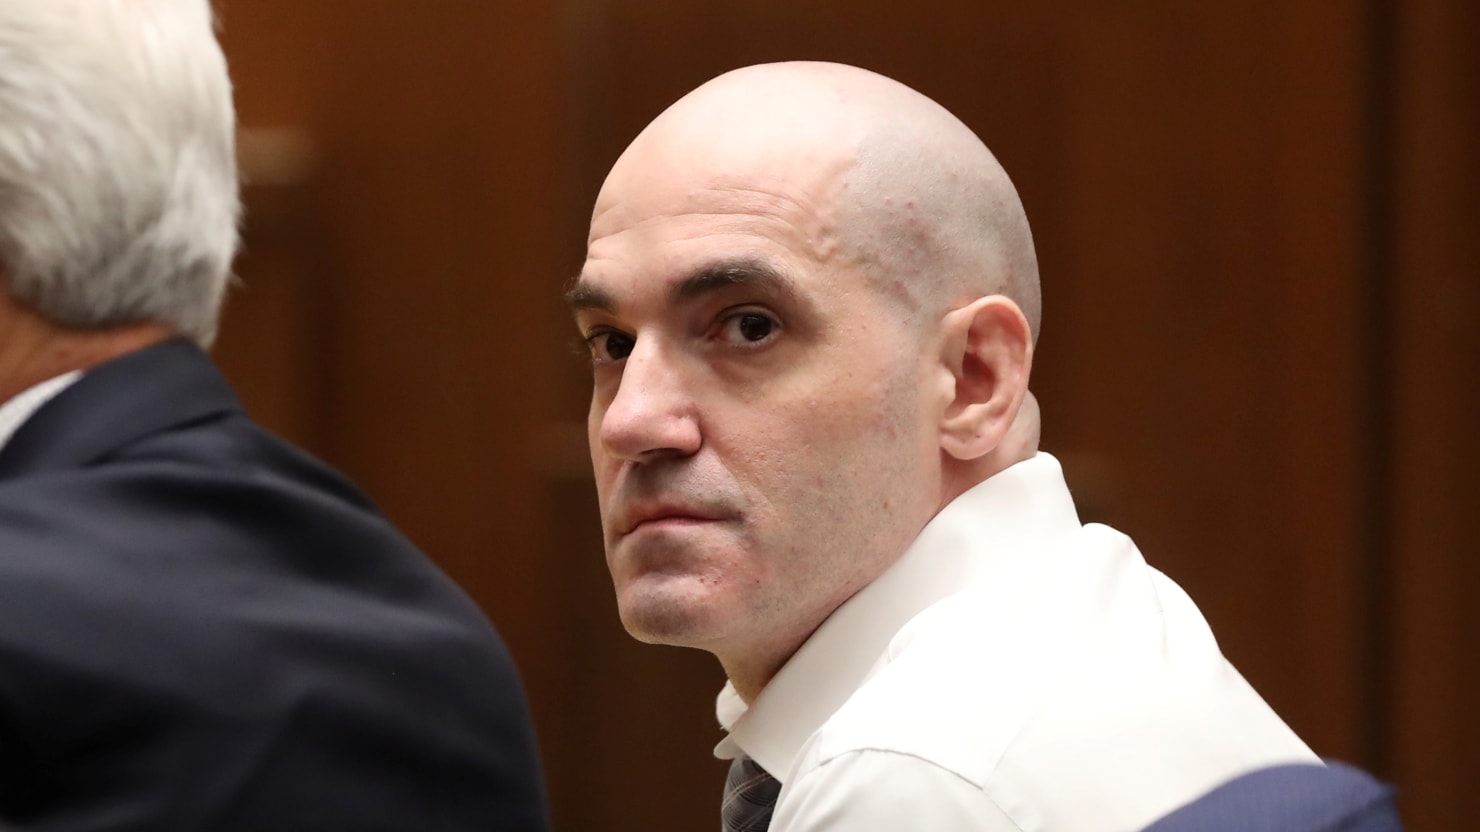 ‘hollywood Ripper Murderer Michael Gargiulo Found Guilty On All Counts